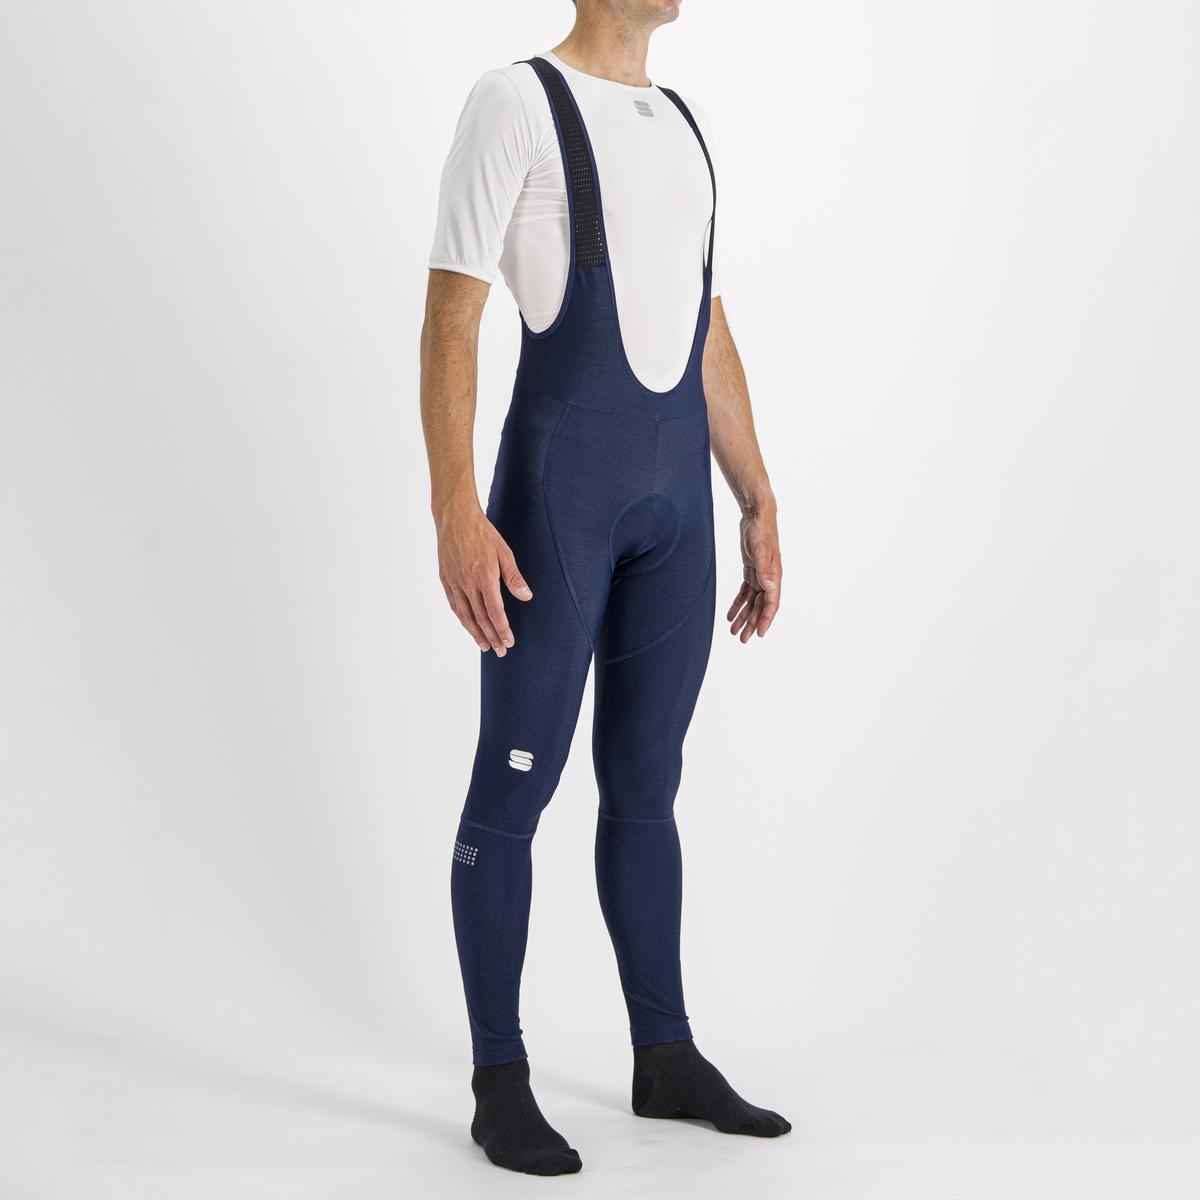 Front body view of model in Sportful Neo Bibtights